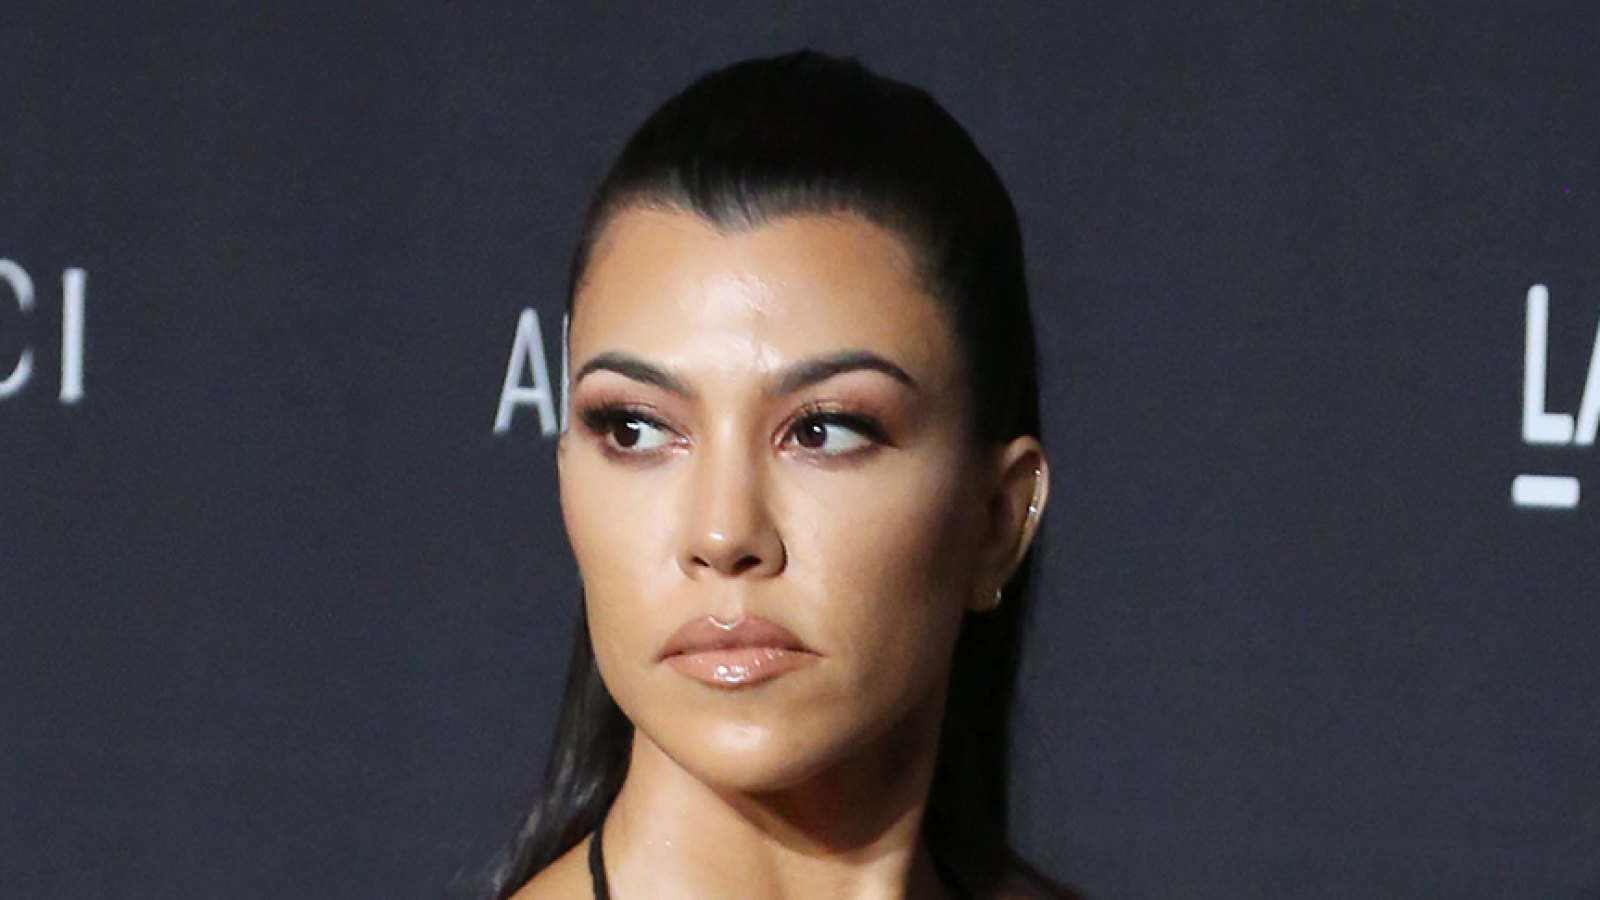 Kourtney Kardashian Questions If Member of Entourage Is Stealing From Her